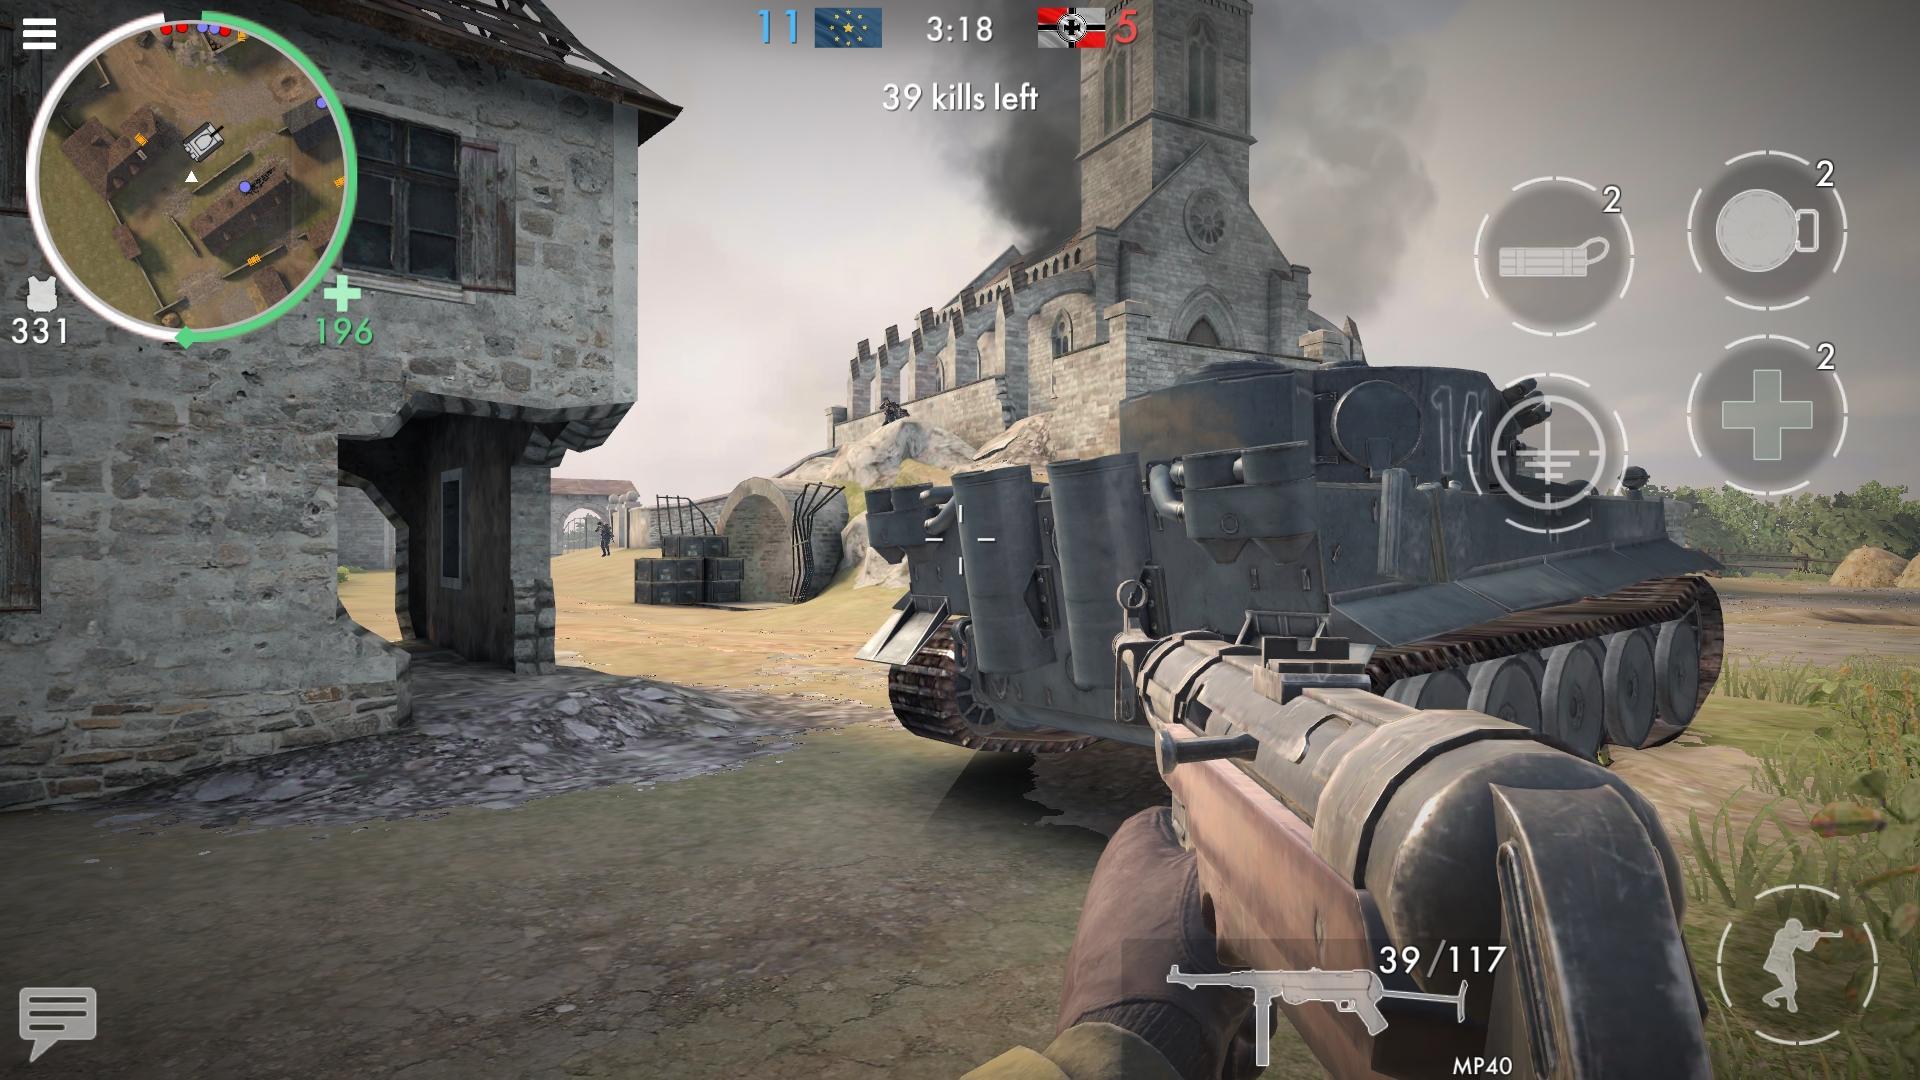 World War Heroes for Android - APK Download - 